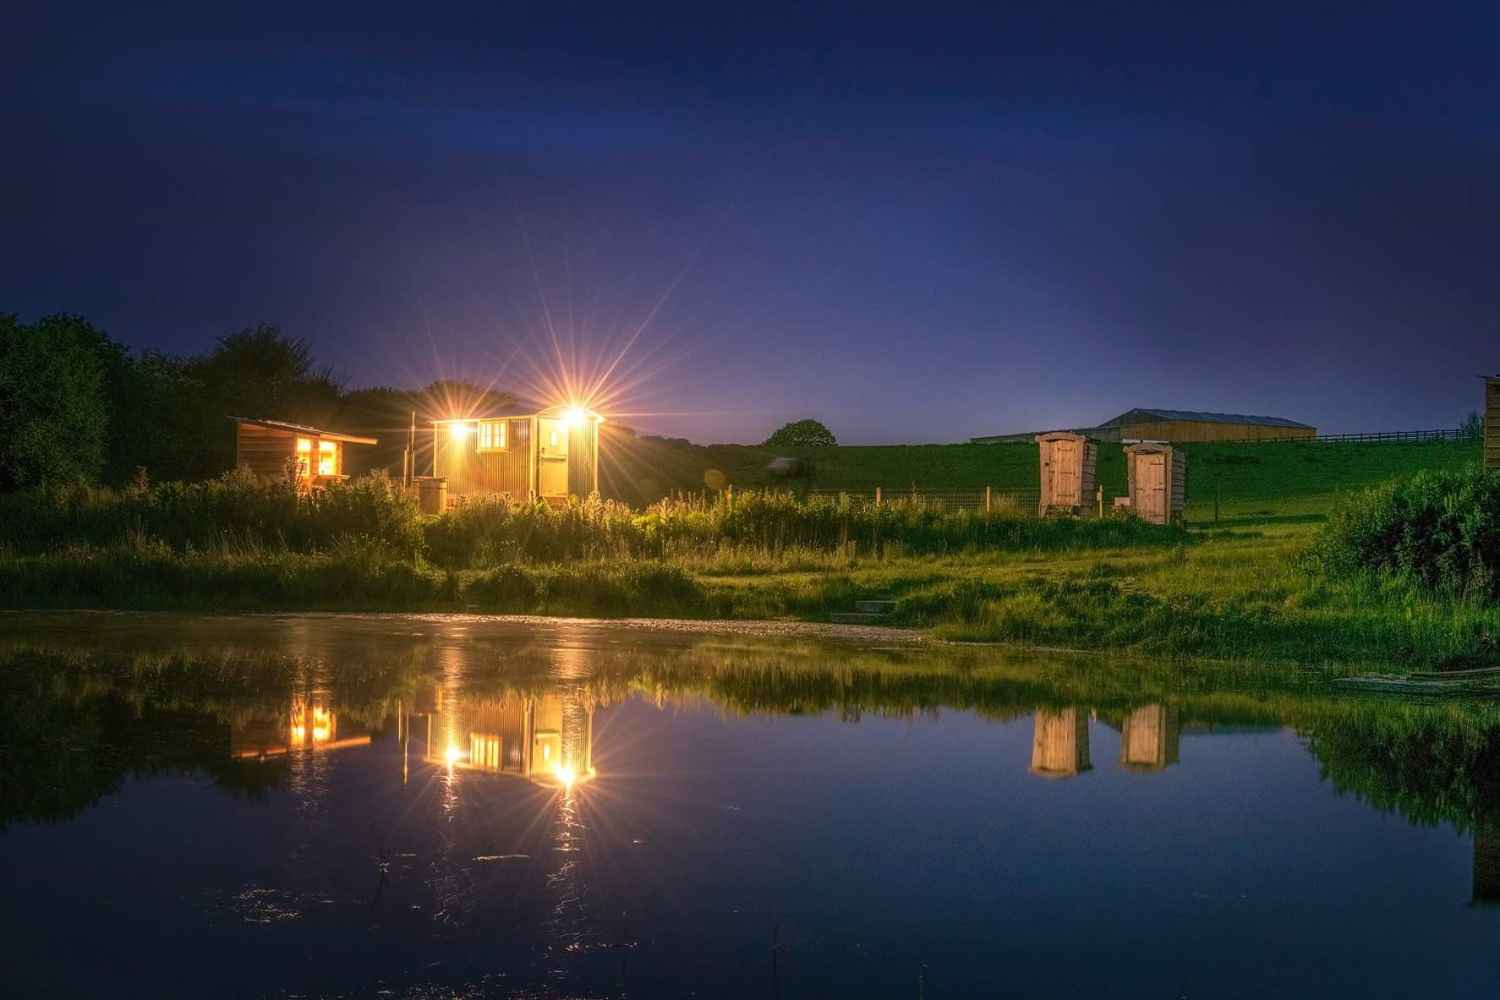 shepherds-hut-in-field-by-lake-lit-up-at-night-glamping-with-hot-tub-cornwall